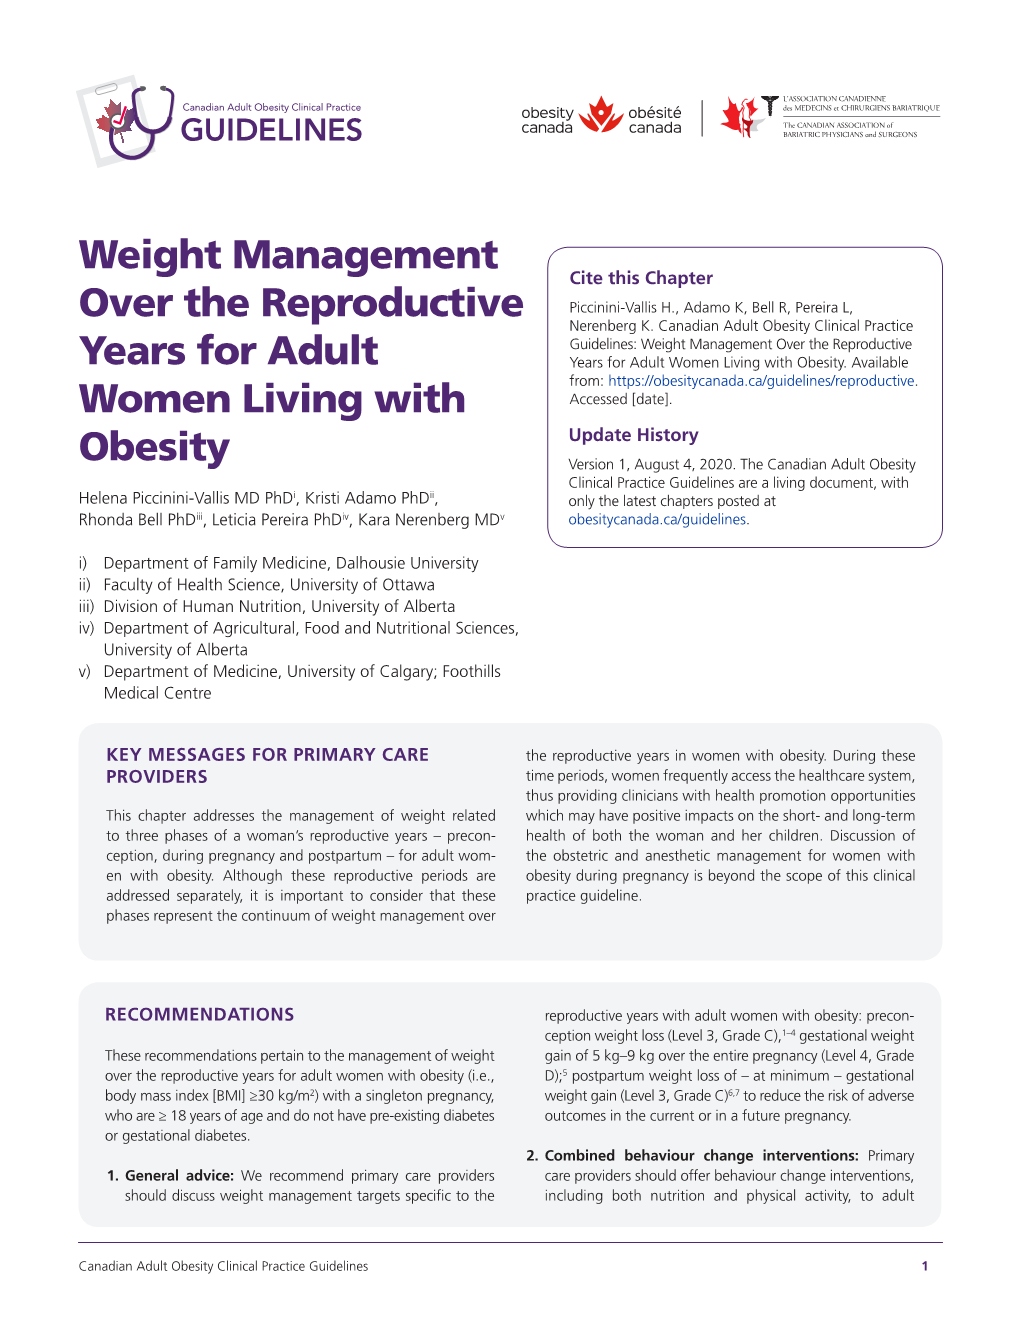 Weight Management Over the Reproductive Years for Adult Women Living with Obesity